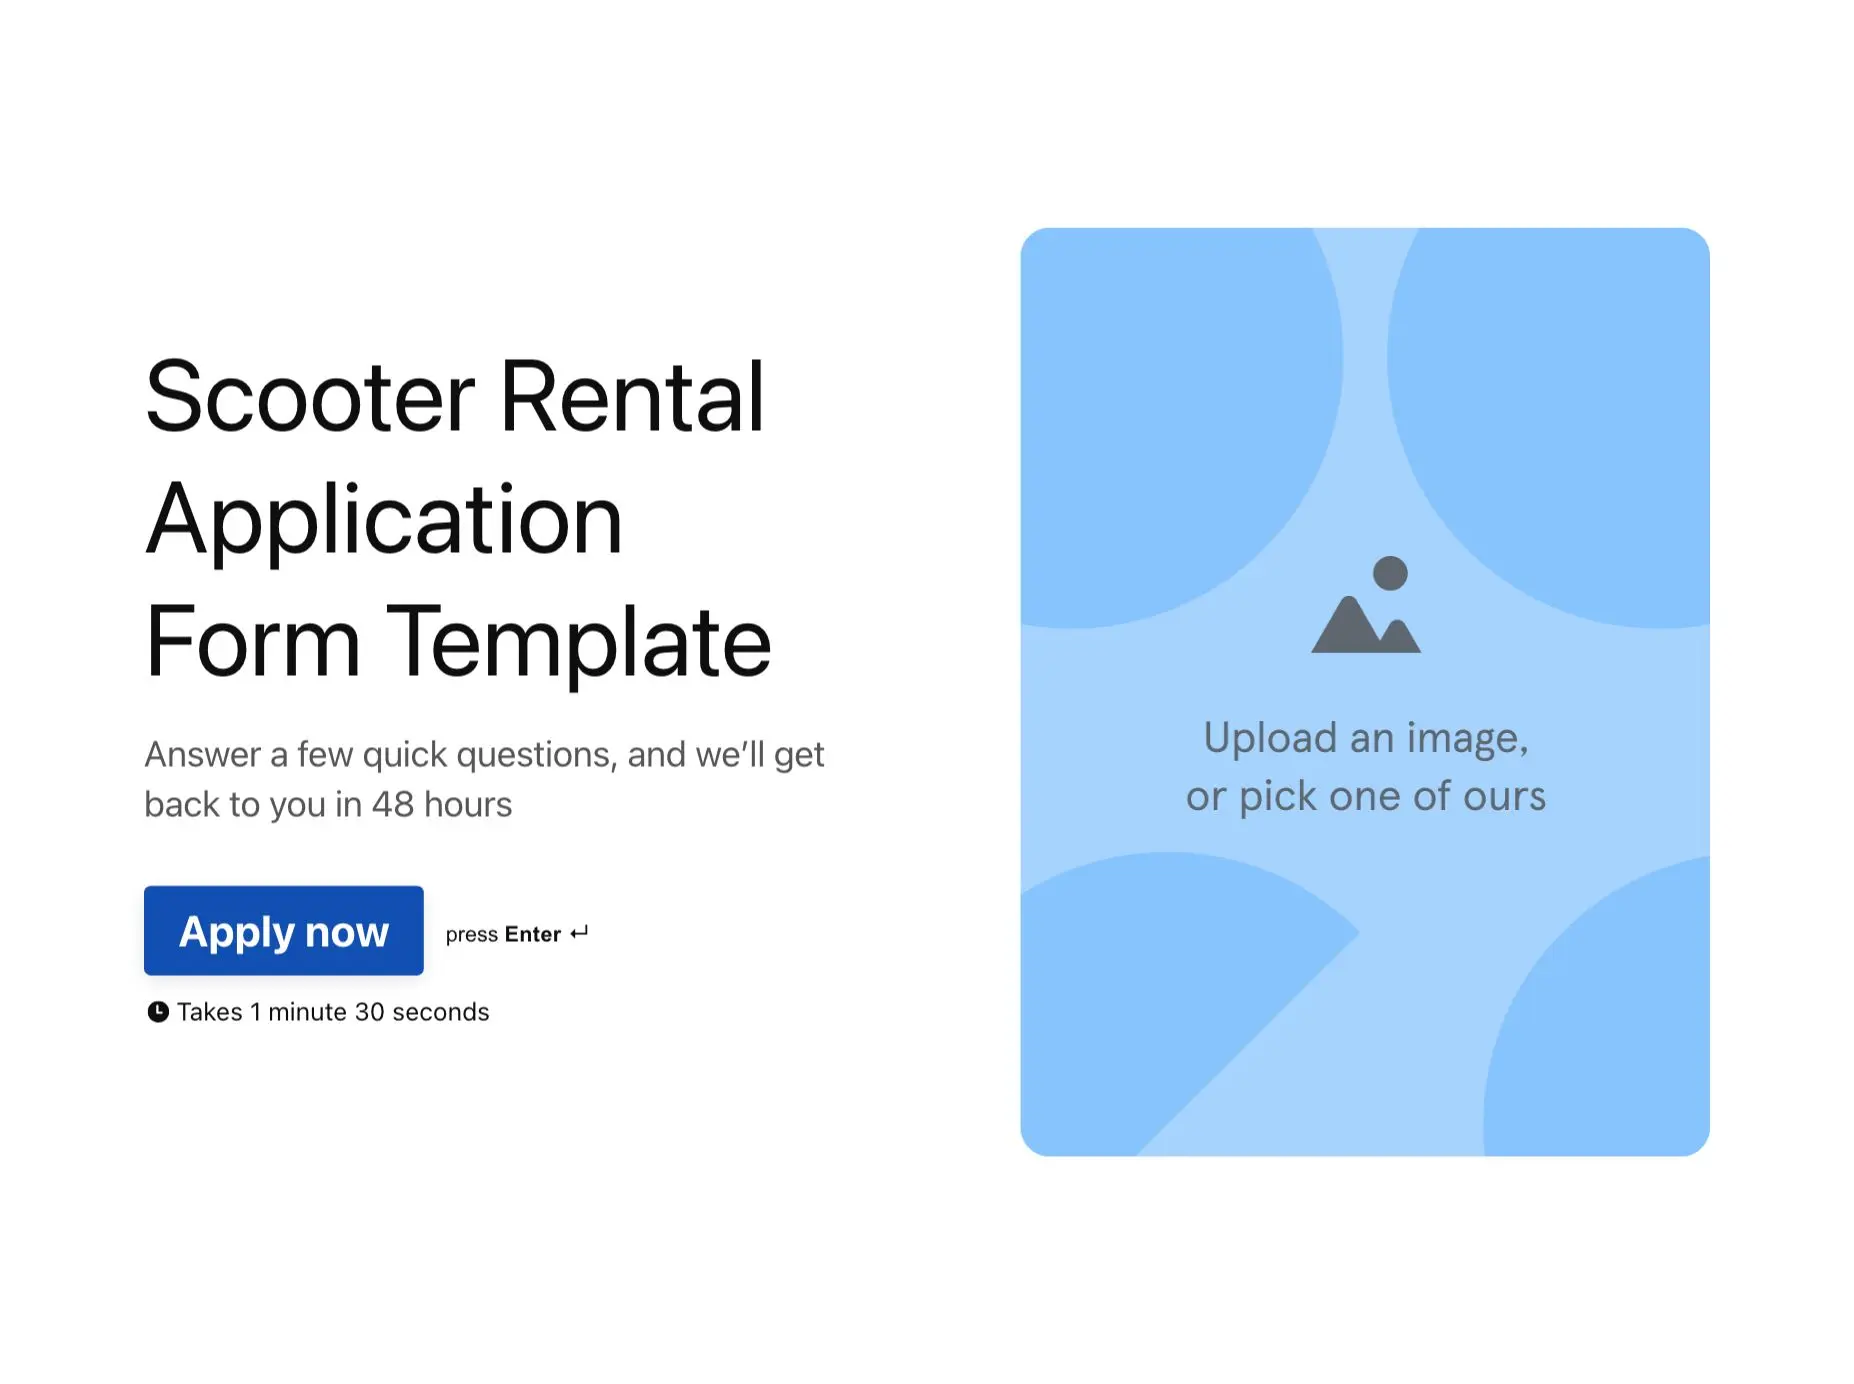 Scooter Rental Application Form Template Hero